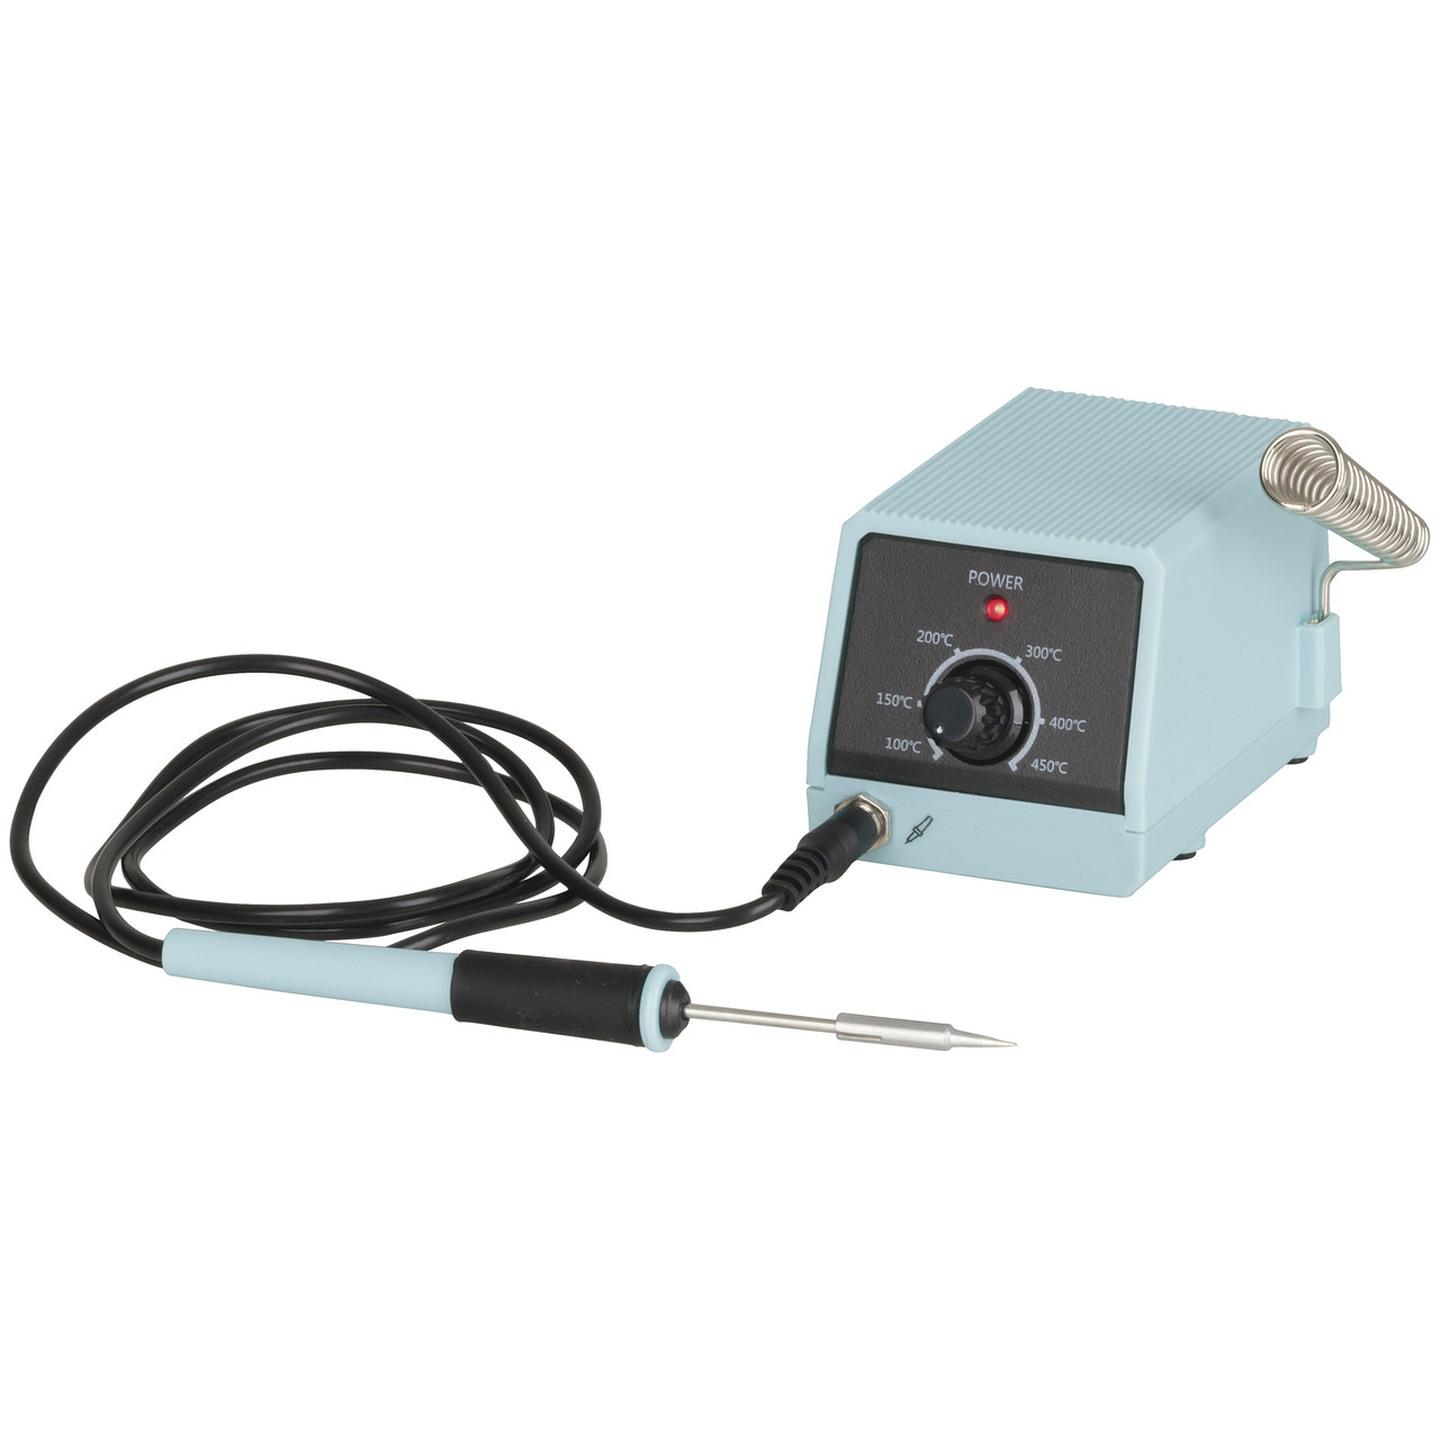 10W Soldering Station 240VAC Duratech